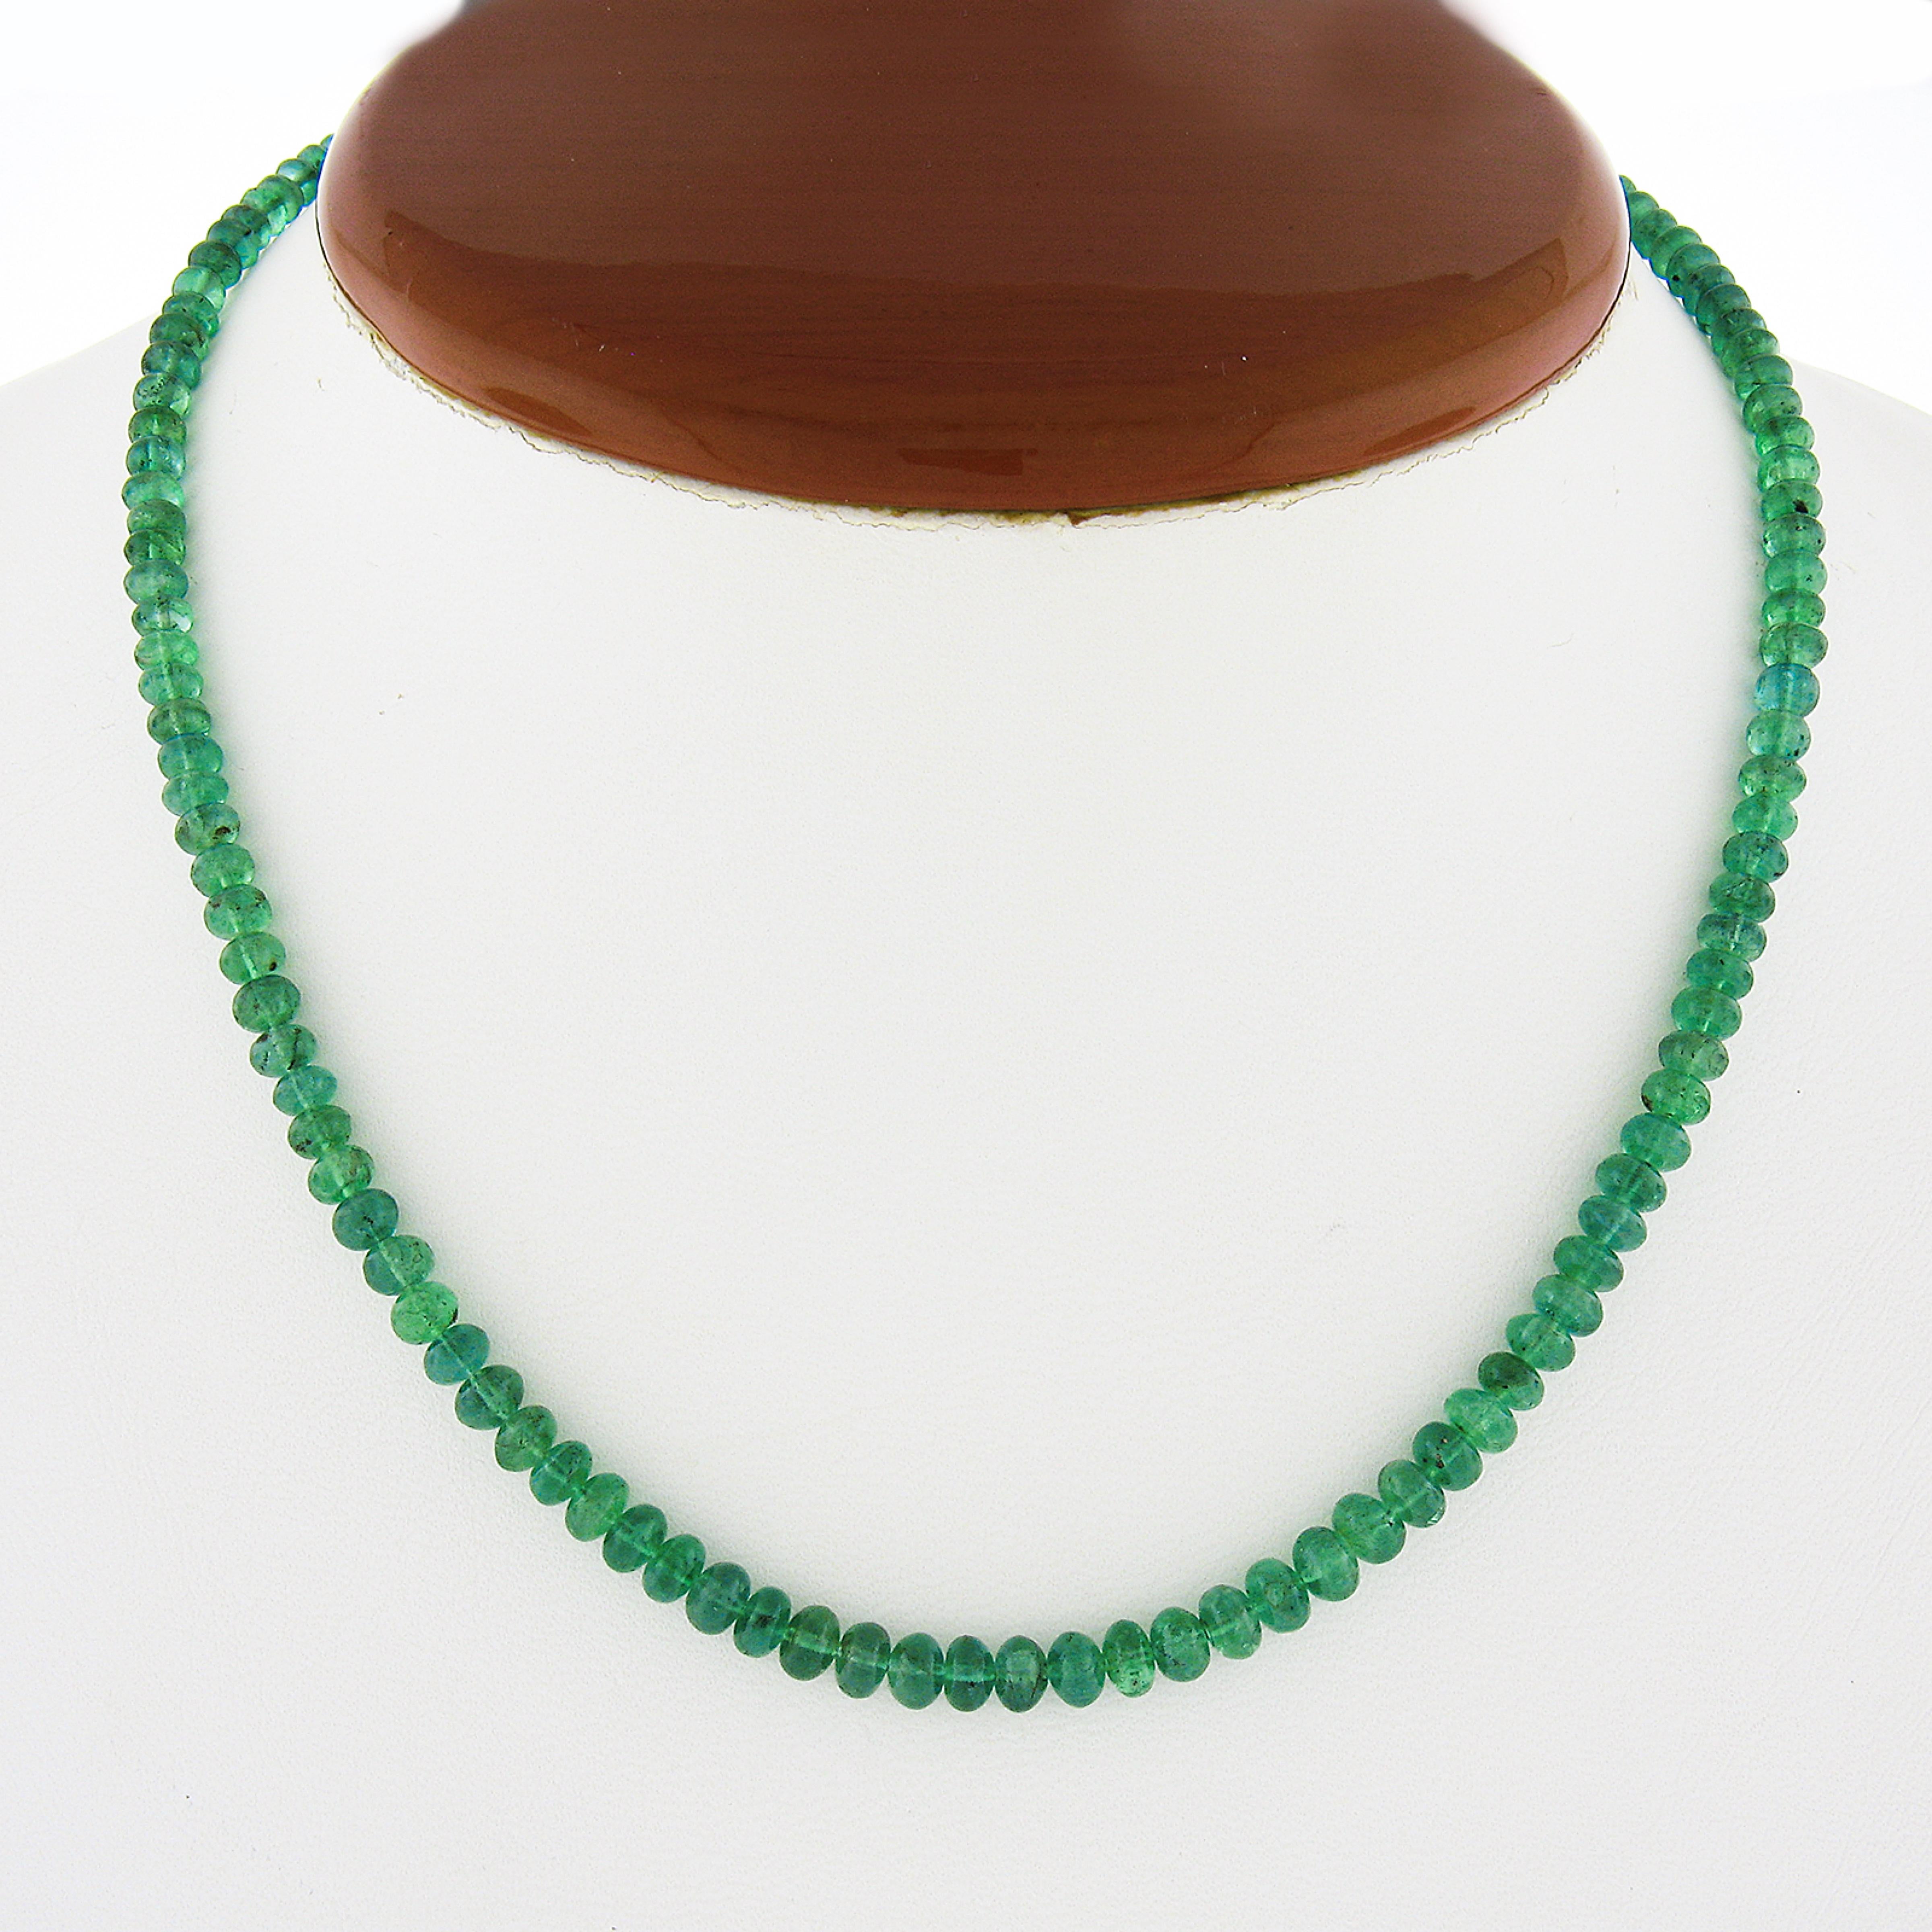 Here we have a magnificent vintage bead strand necklace that features 127 natural genuine emerald Rondelle beads that are neatly strung throughout. The beads range from 3.45mm to 4.5mm in diameter and three of them were selected at random for